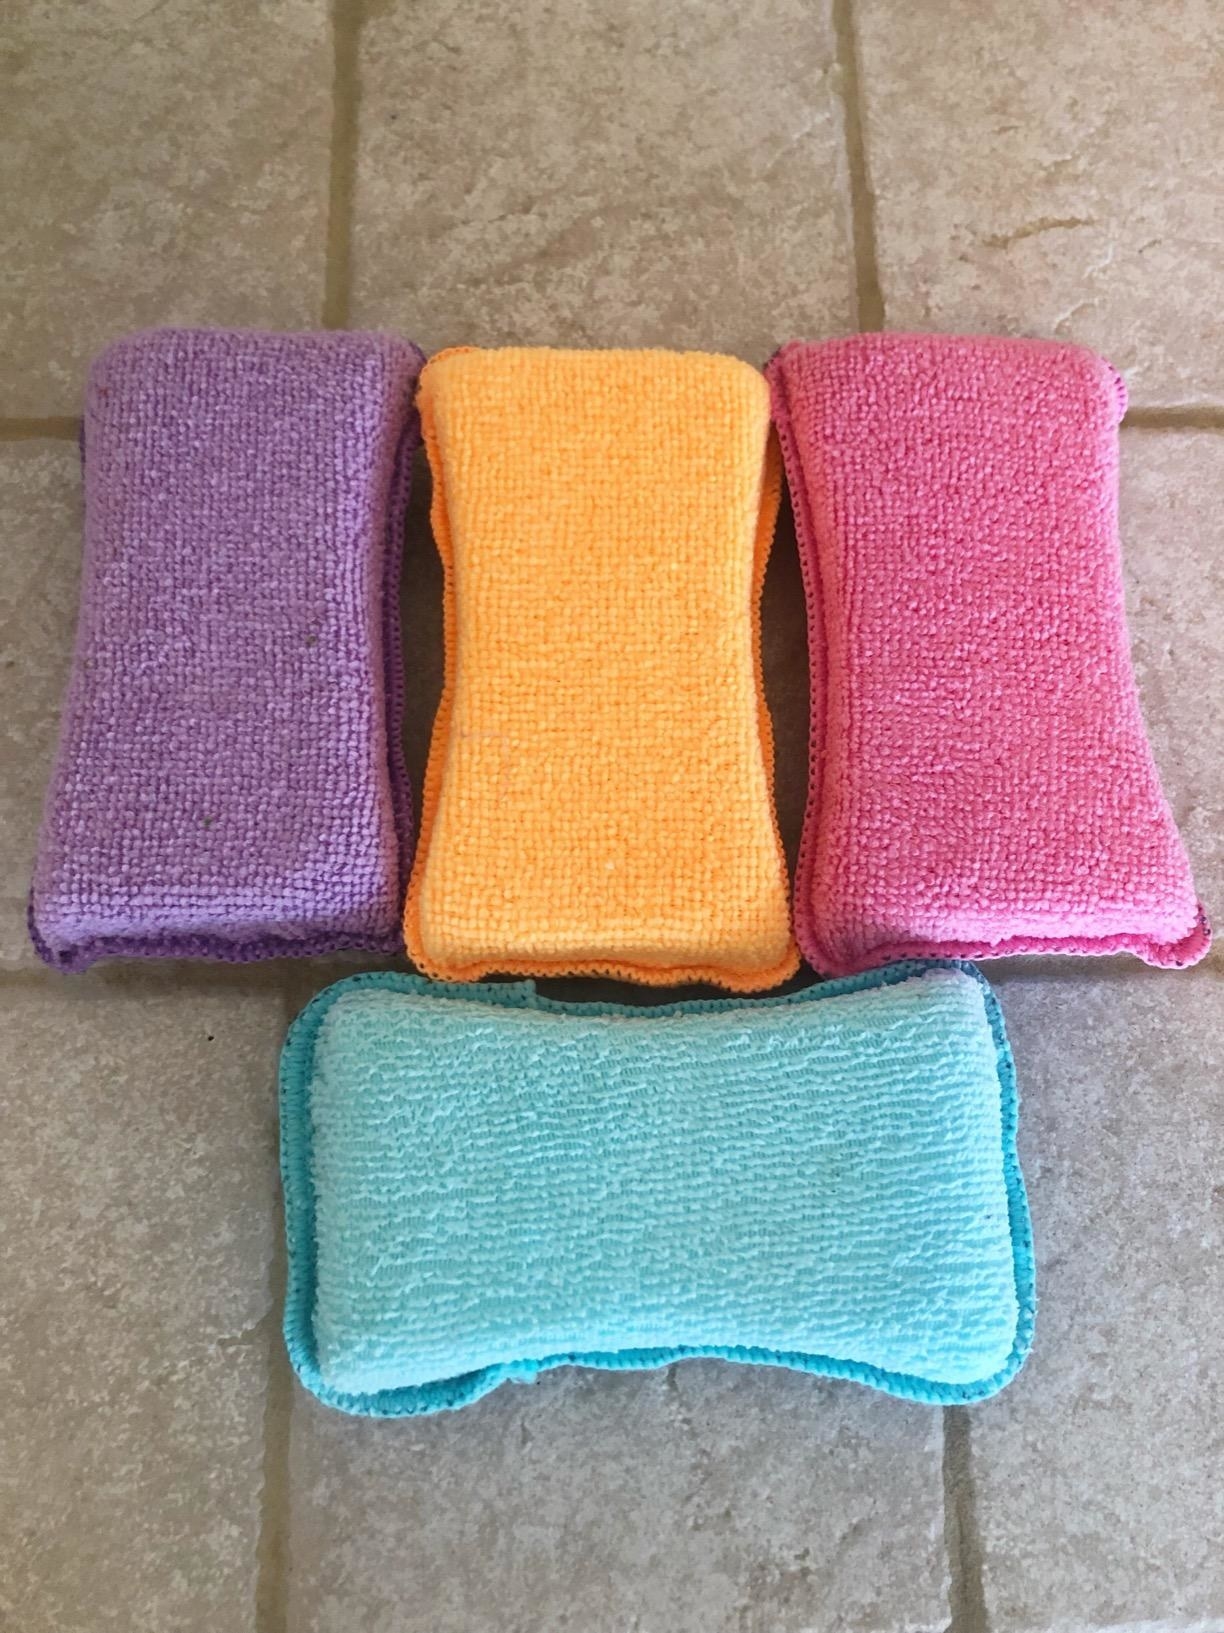 Reviewer image of four colorful sponges